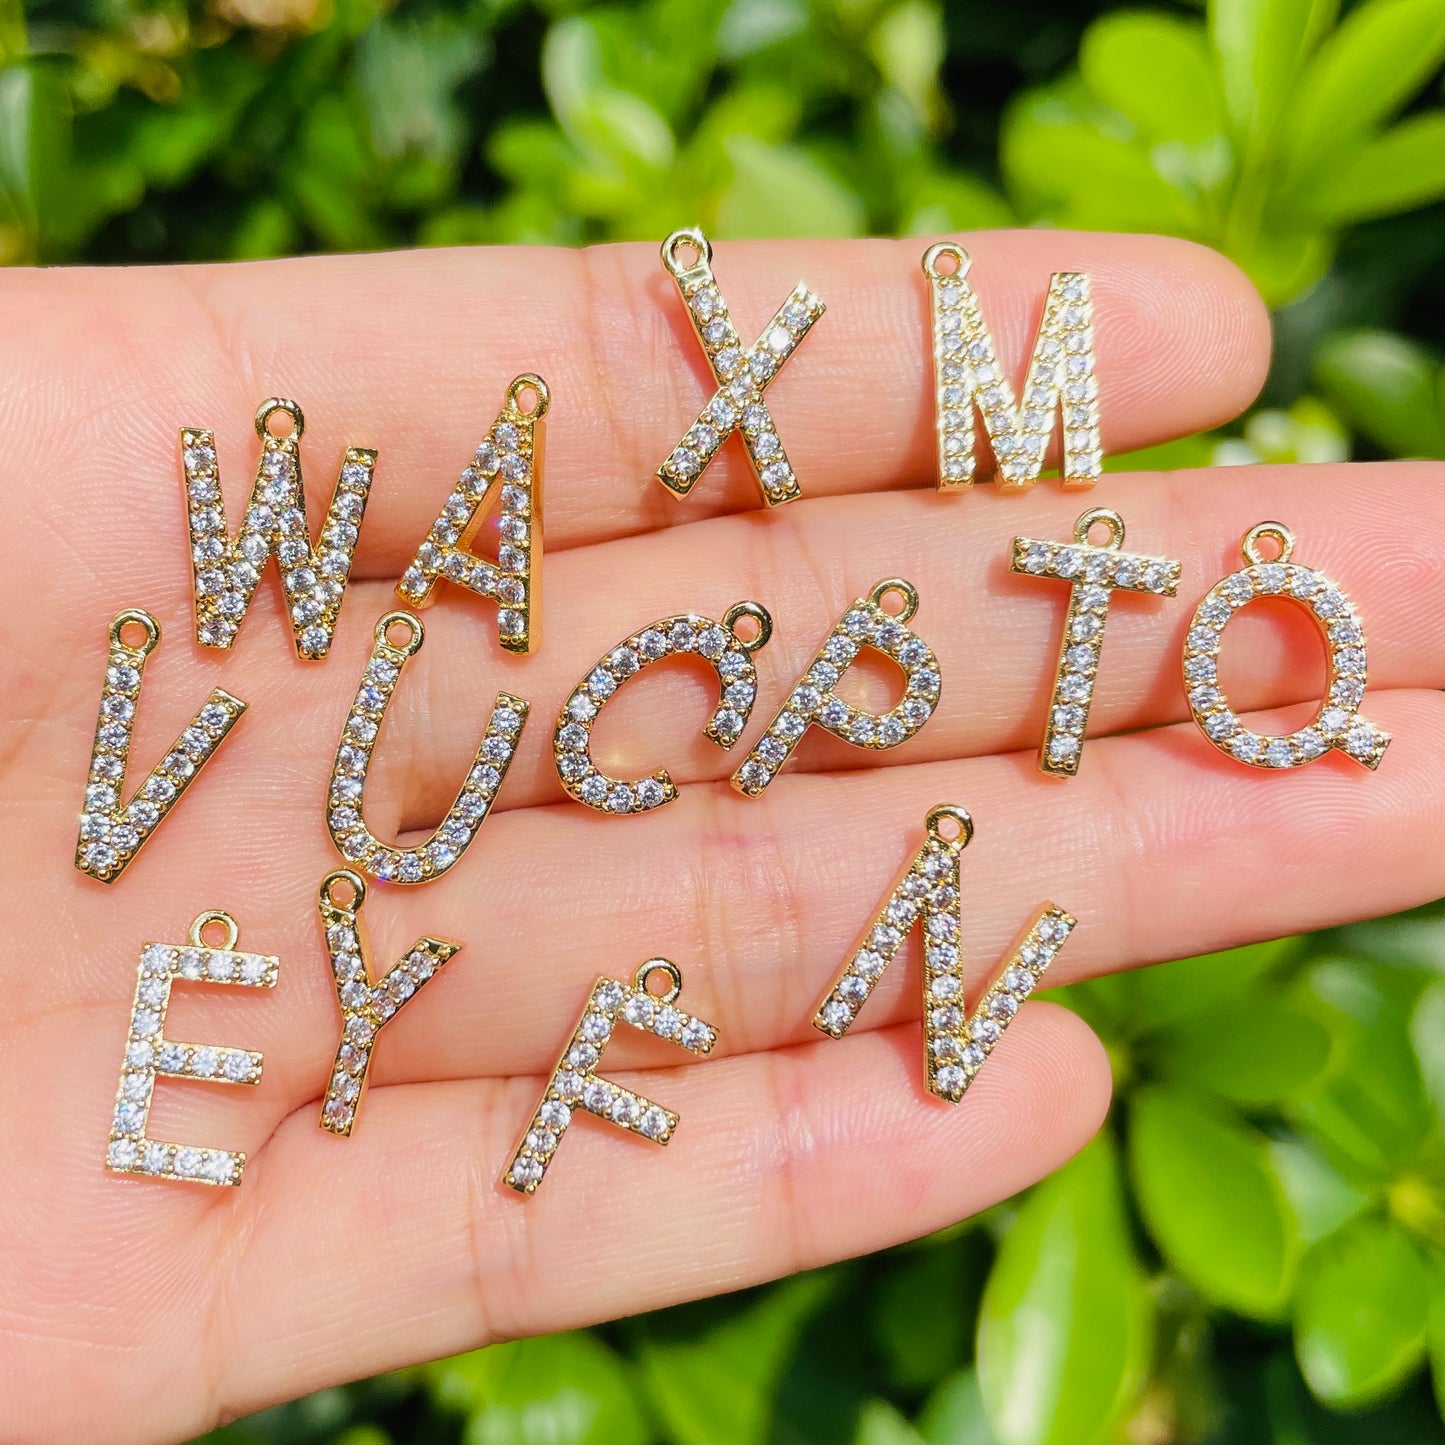 26pcs/lot 15*12mm CZ Paved Initial Letter Alphabet Charms-Gold & Silver Gold-26pcs CZ Paved Charms Initials & Numbers Small Sizes Charms Beads Beyond